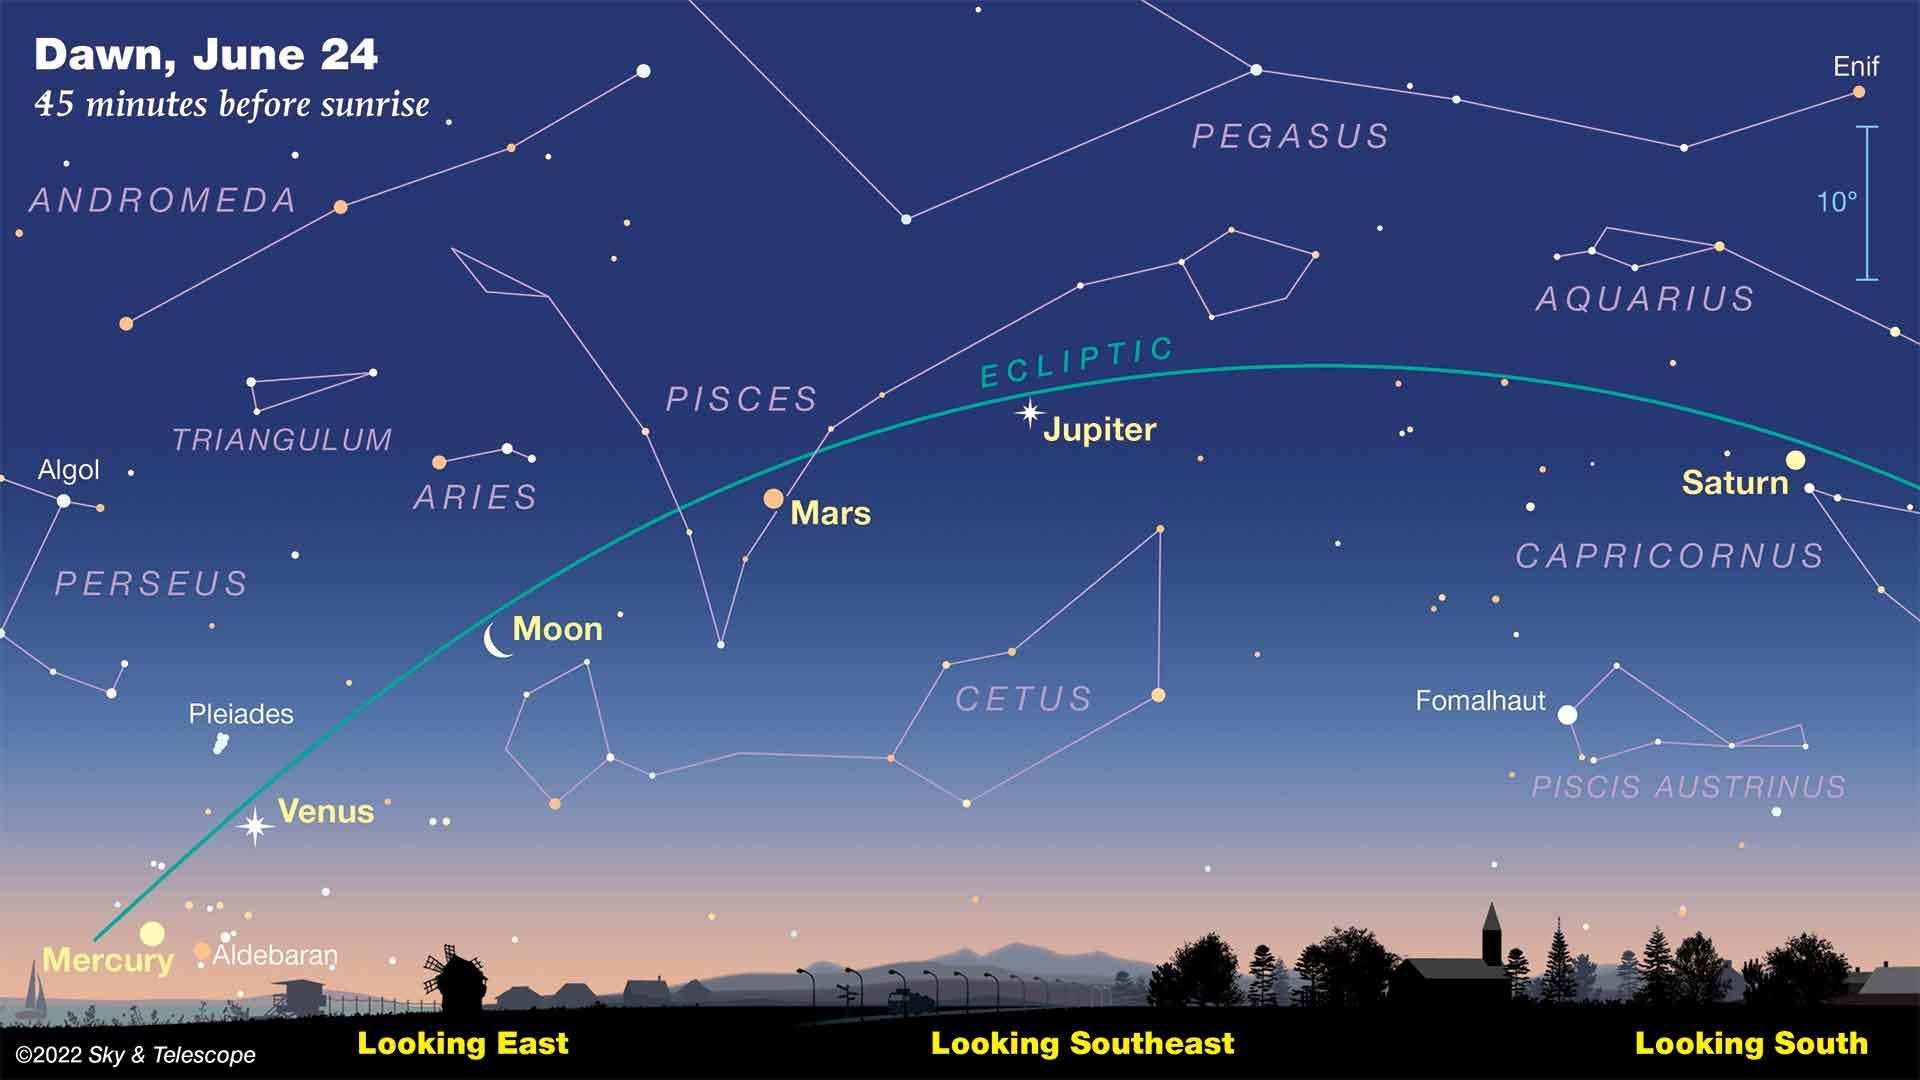 At dawn on June 24, the crescent moon will be placed between Venus and Mars. (Illustration courtesy of Sky & Telescope)